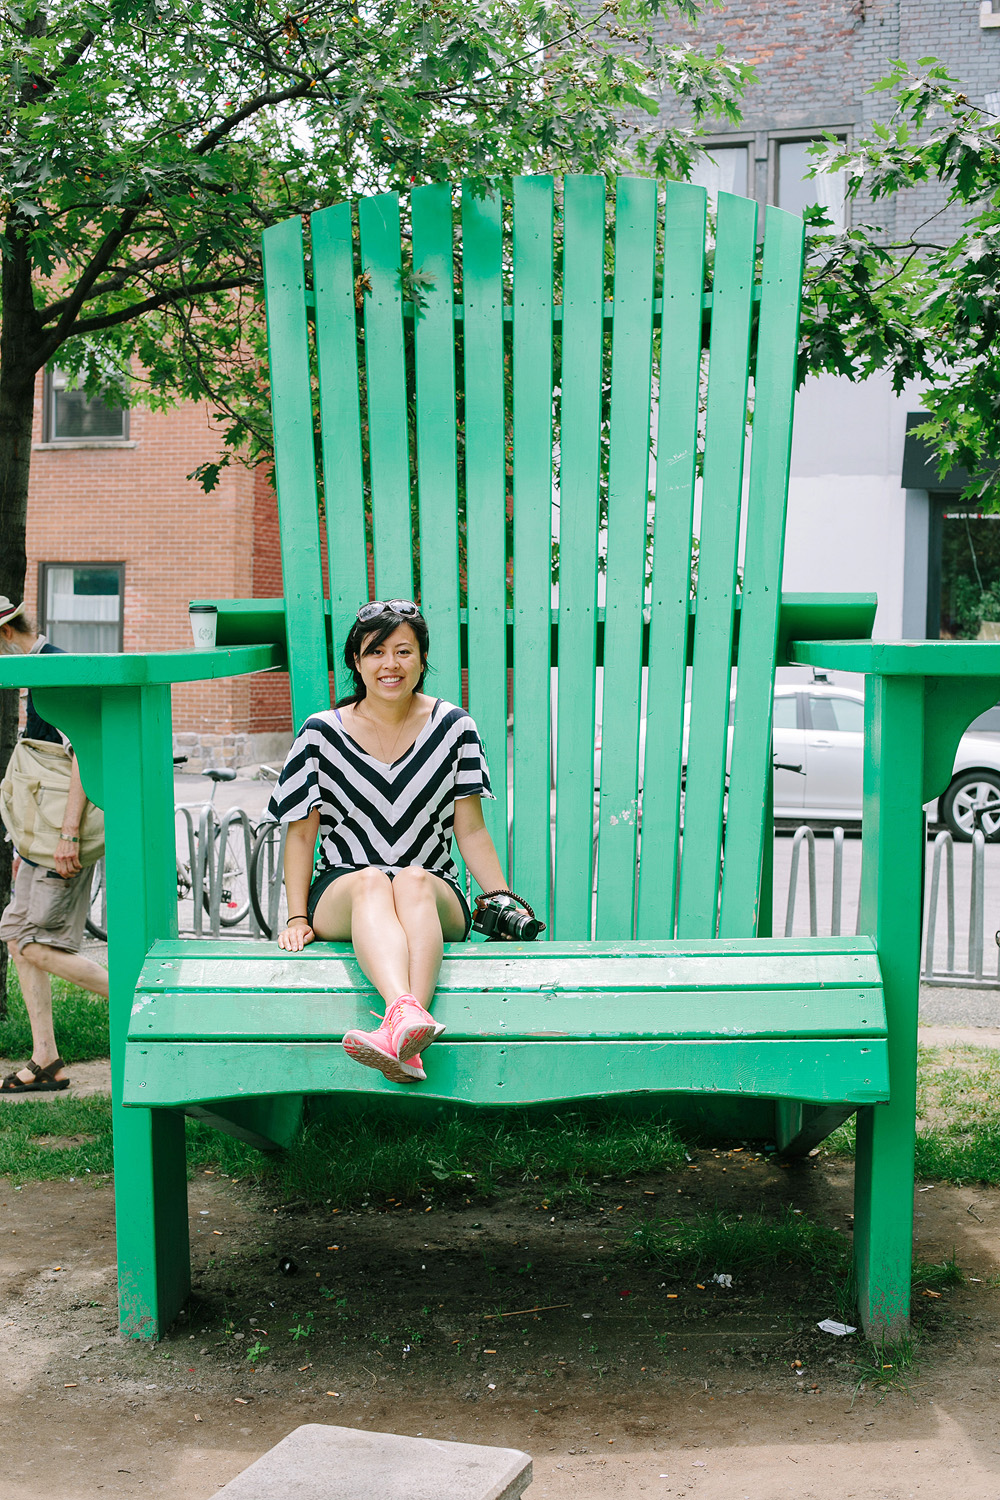 Big Green Chair in Montreal